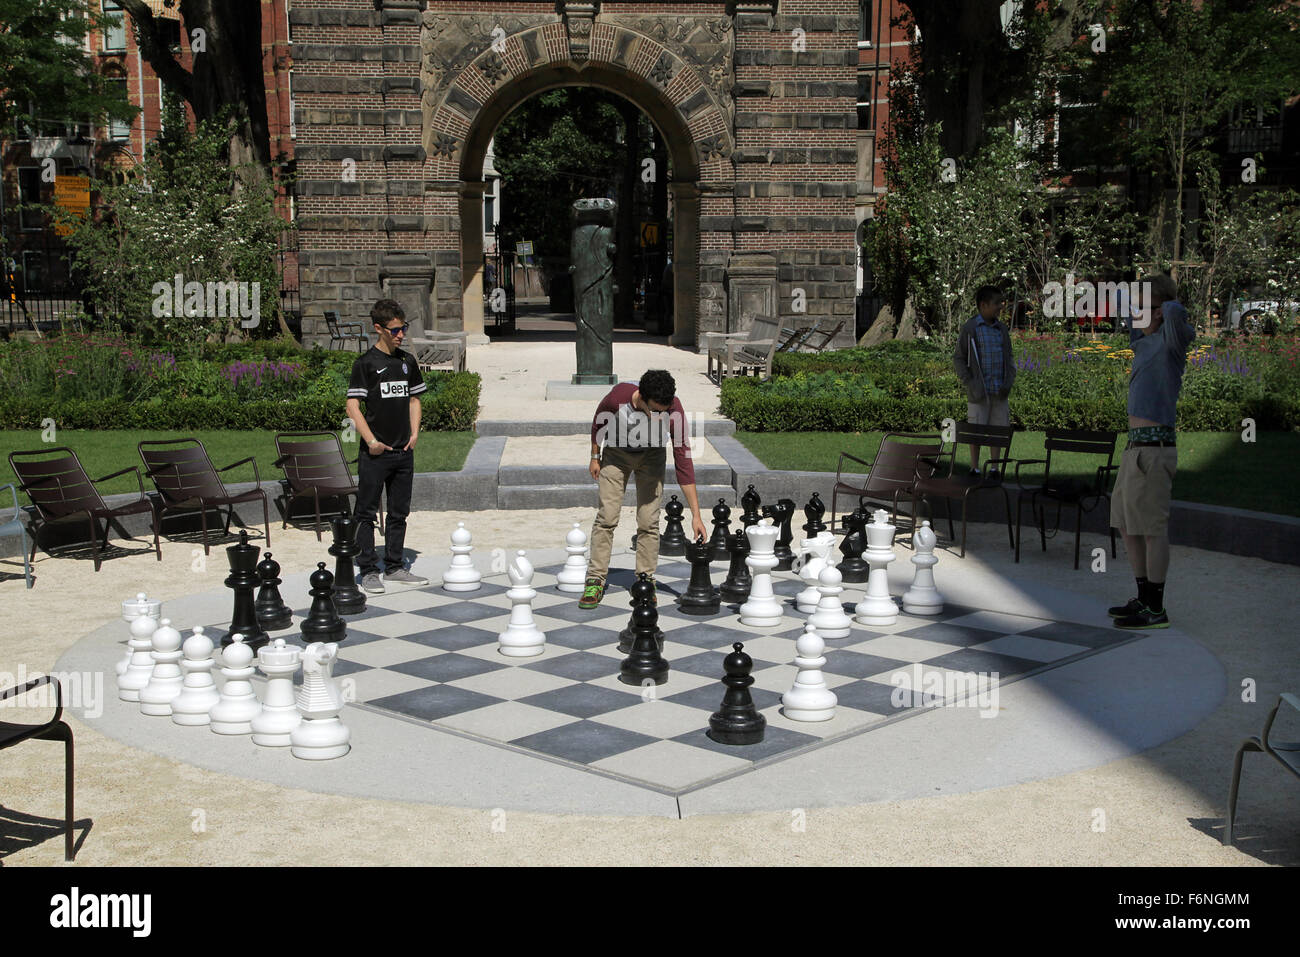 Young people playing chess at the Rijksmuseum park Amsterdam Stock Photo